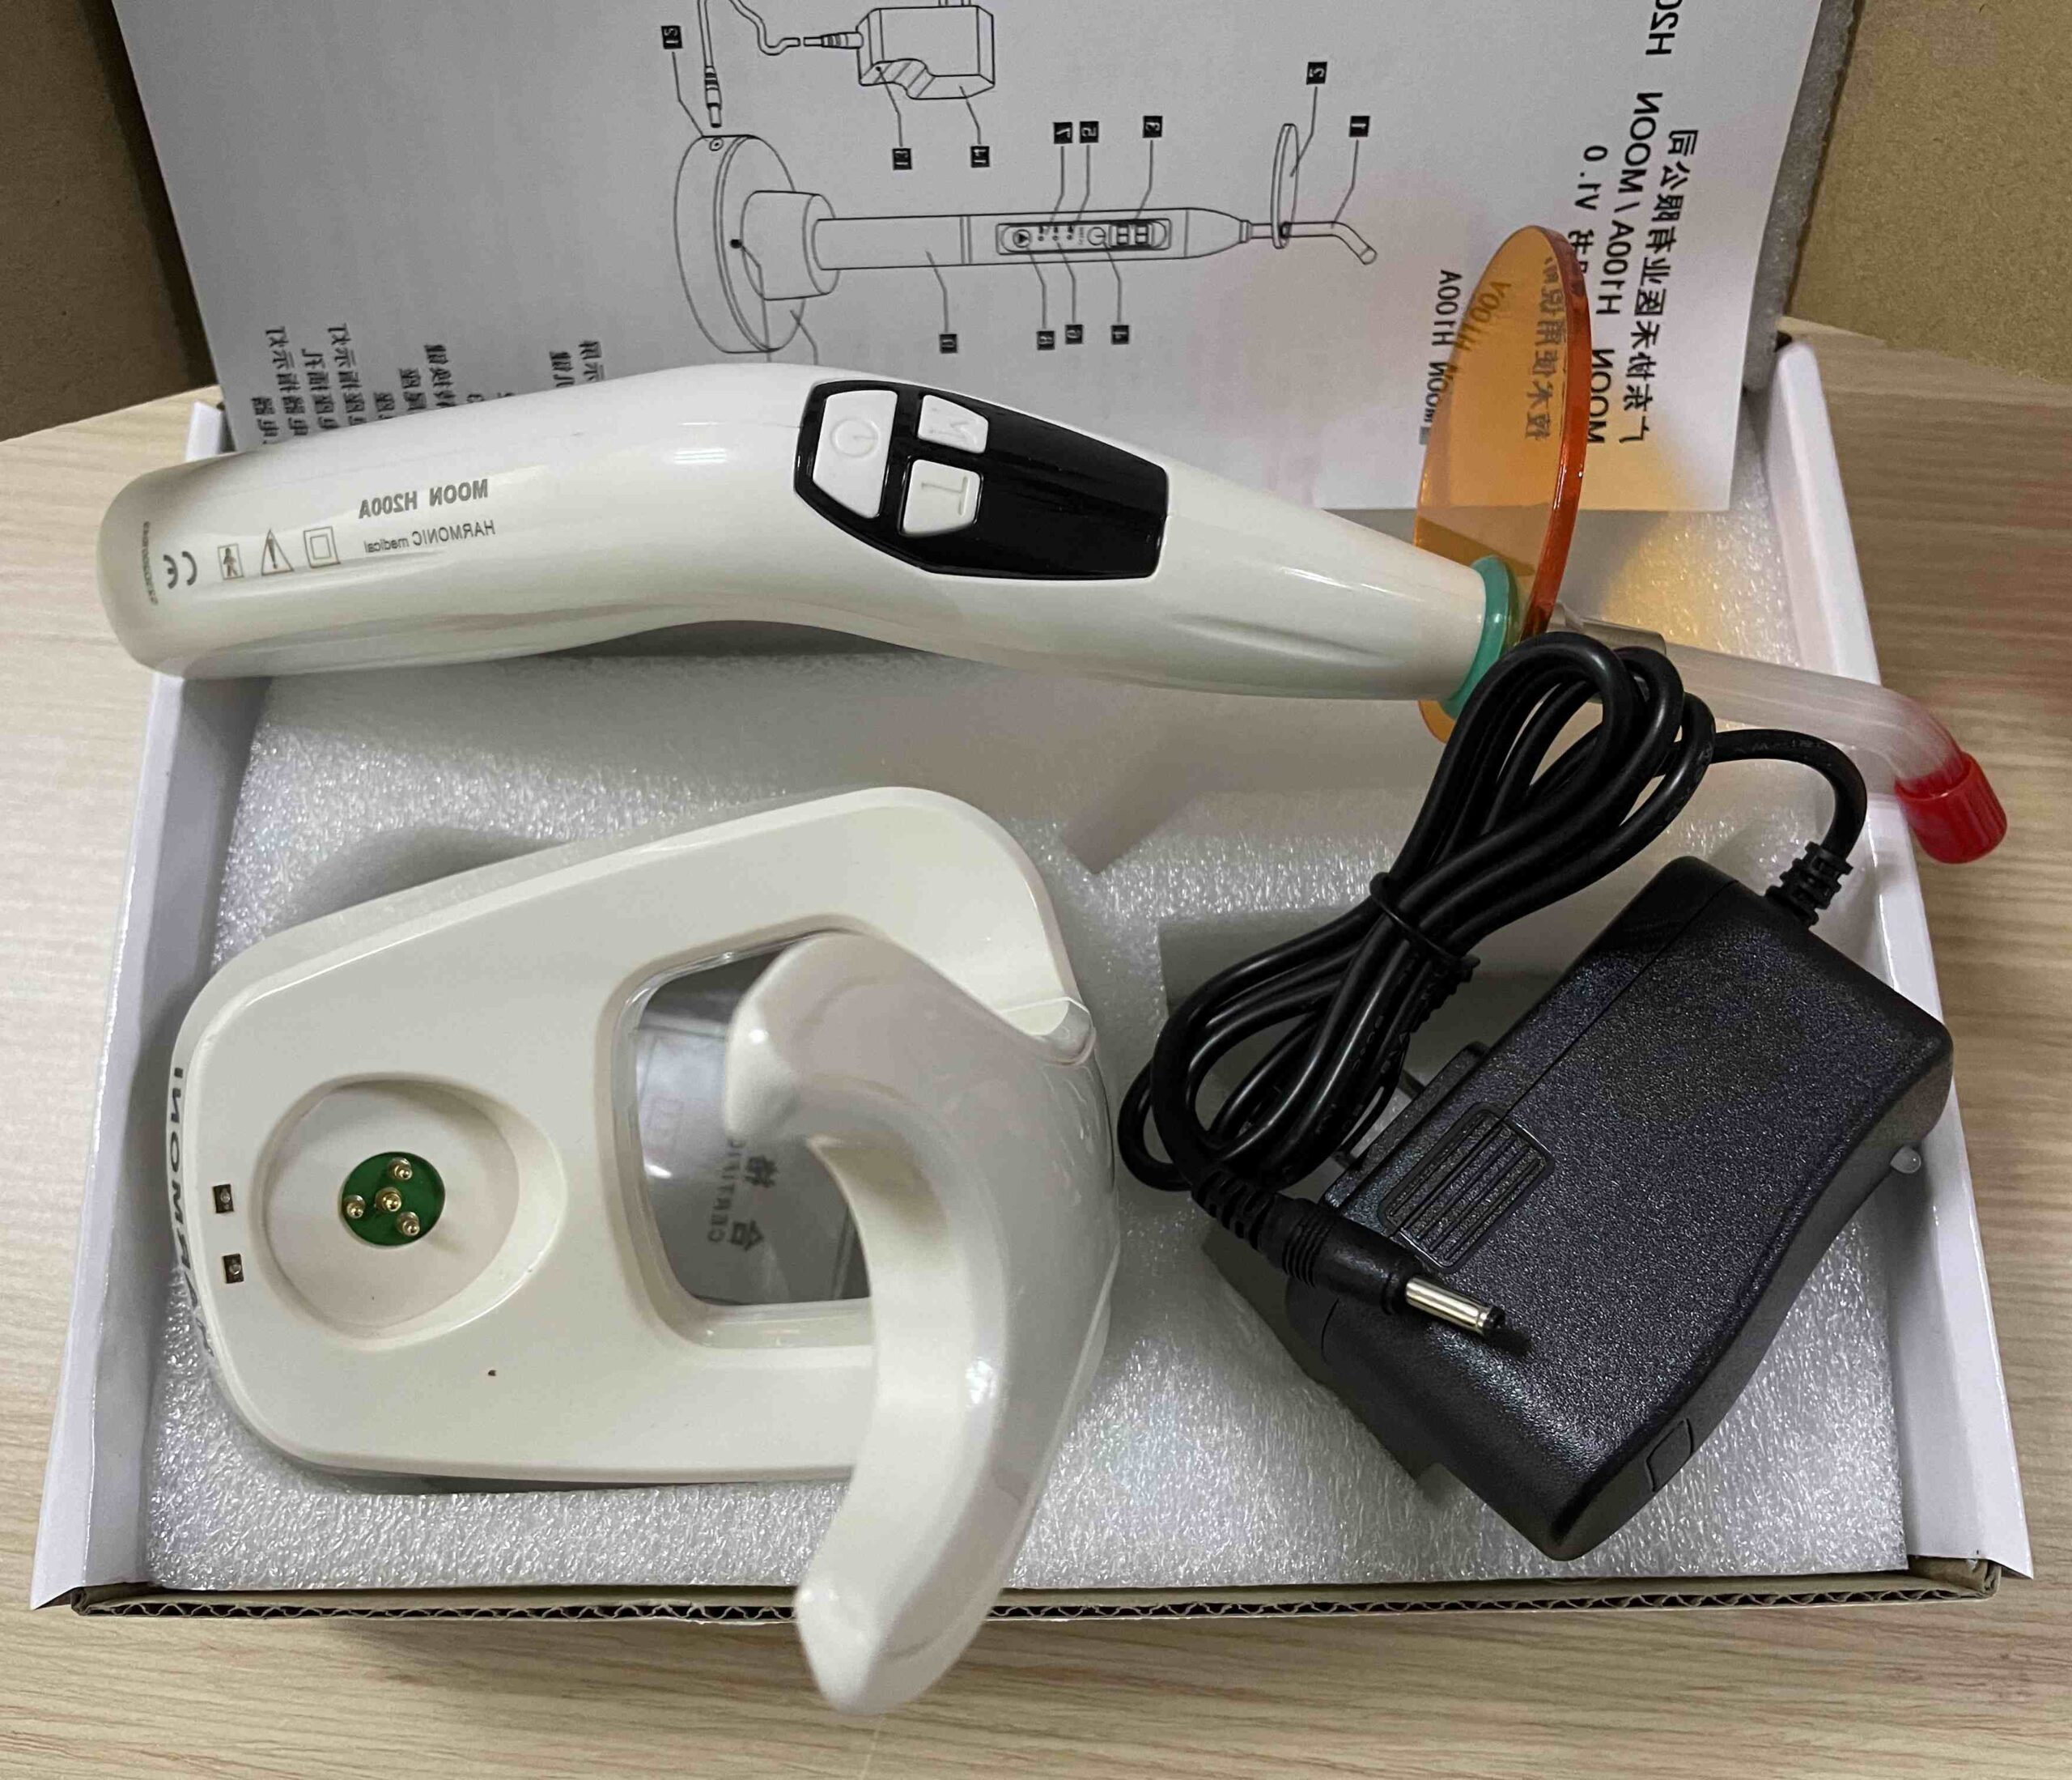 Dental Wireless Cordless LED Curing Light Lamp Resin Cure Machine 5W  1500mw/cm²